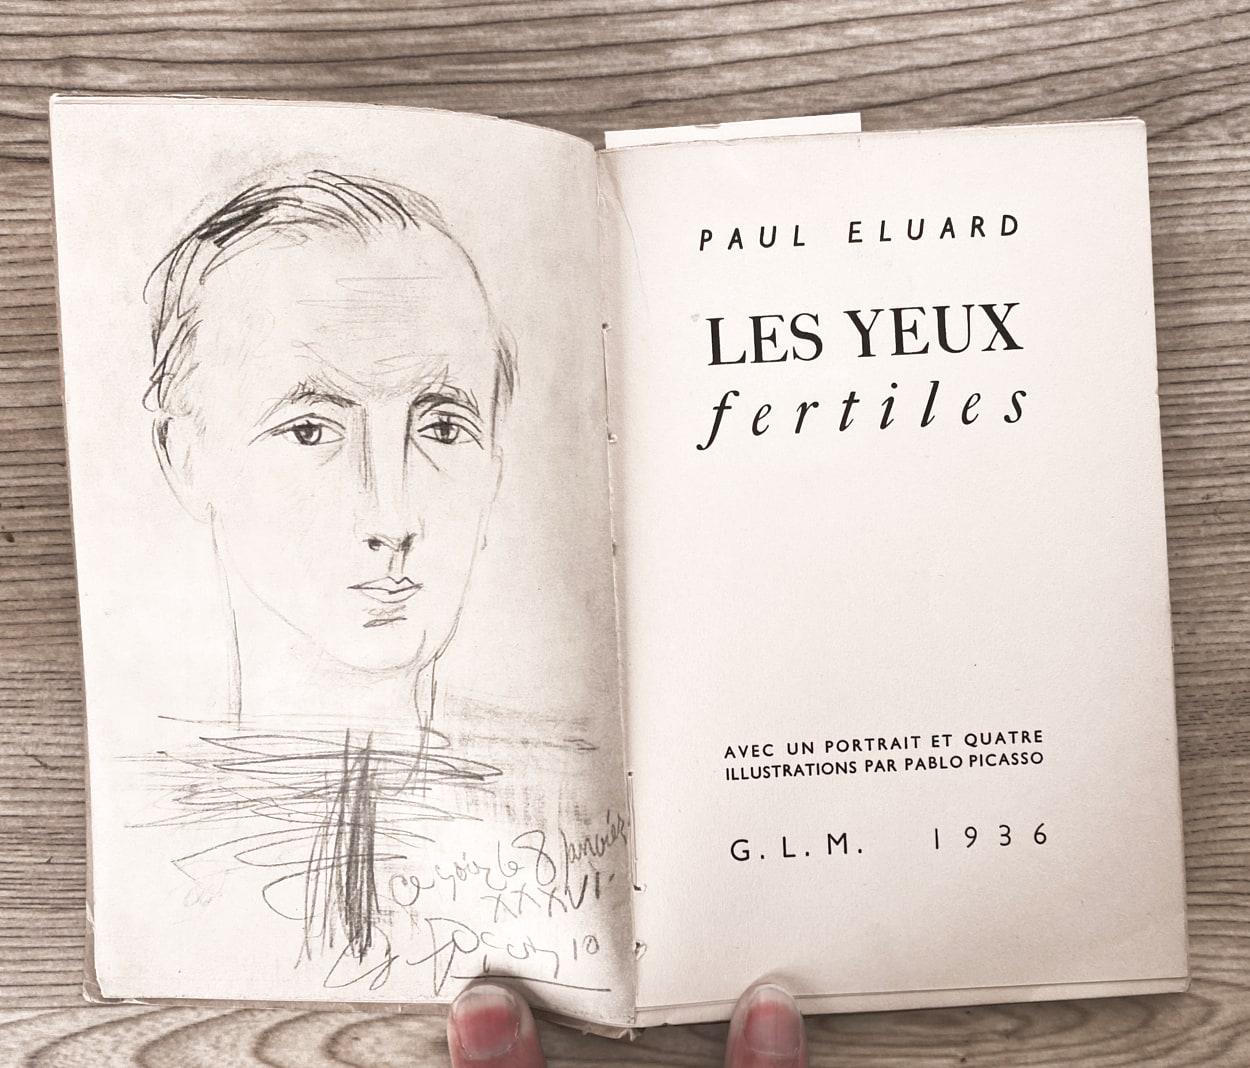 Paul Eluard - with an etching by Pablo Picasso